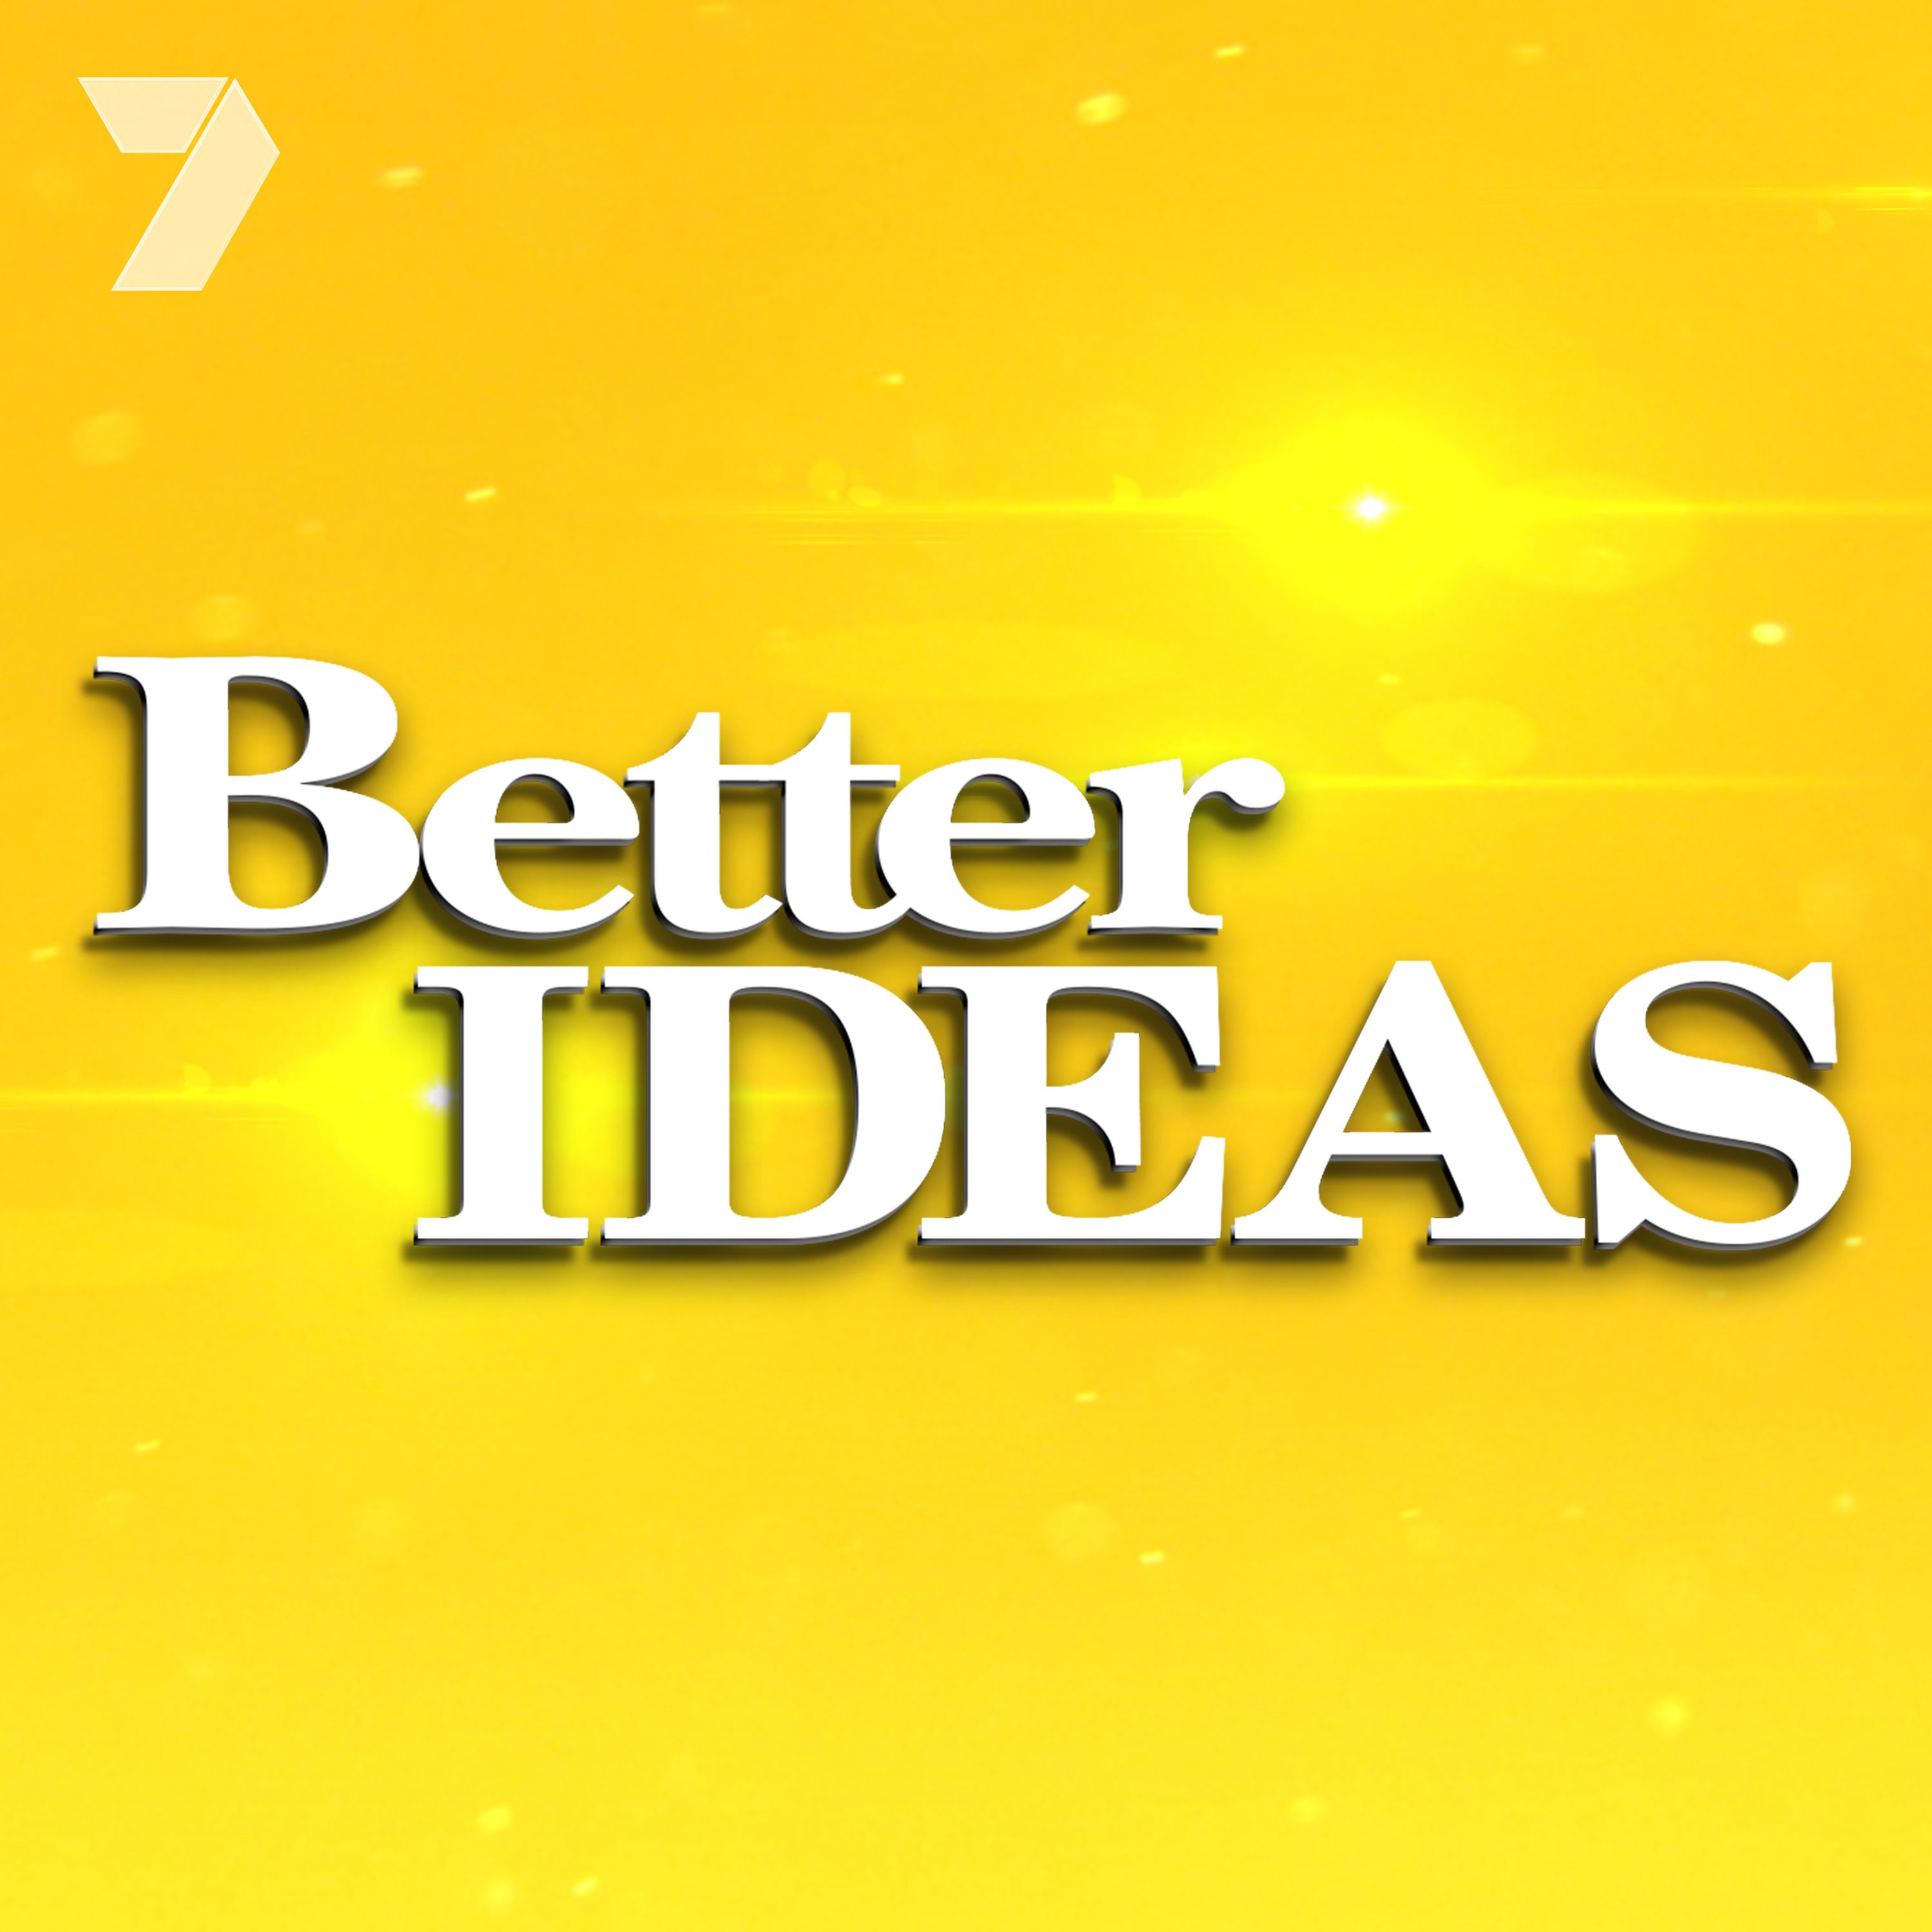 Better Ideas - Just a taste of what to expect